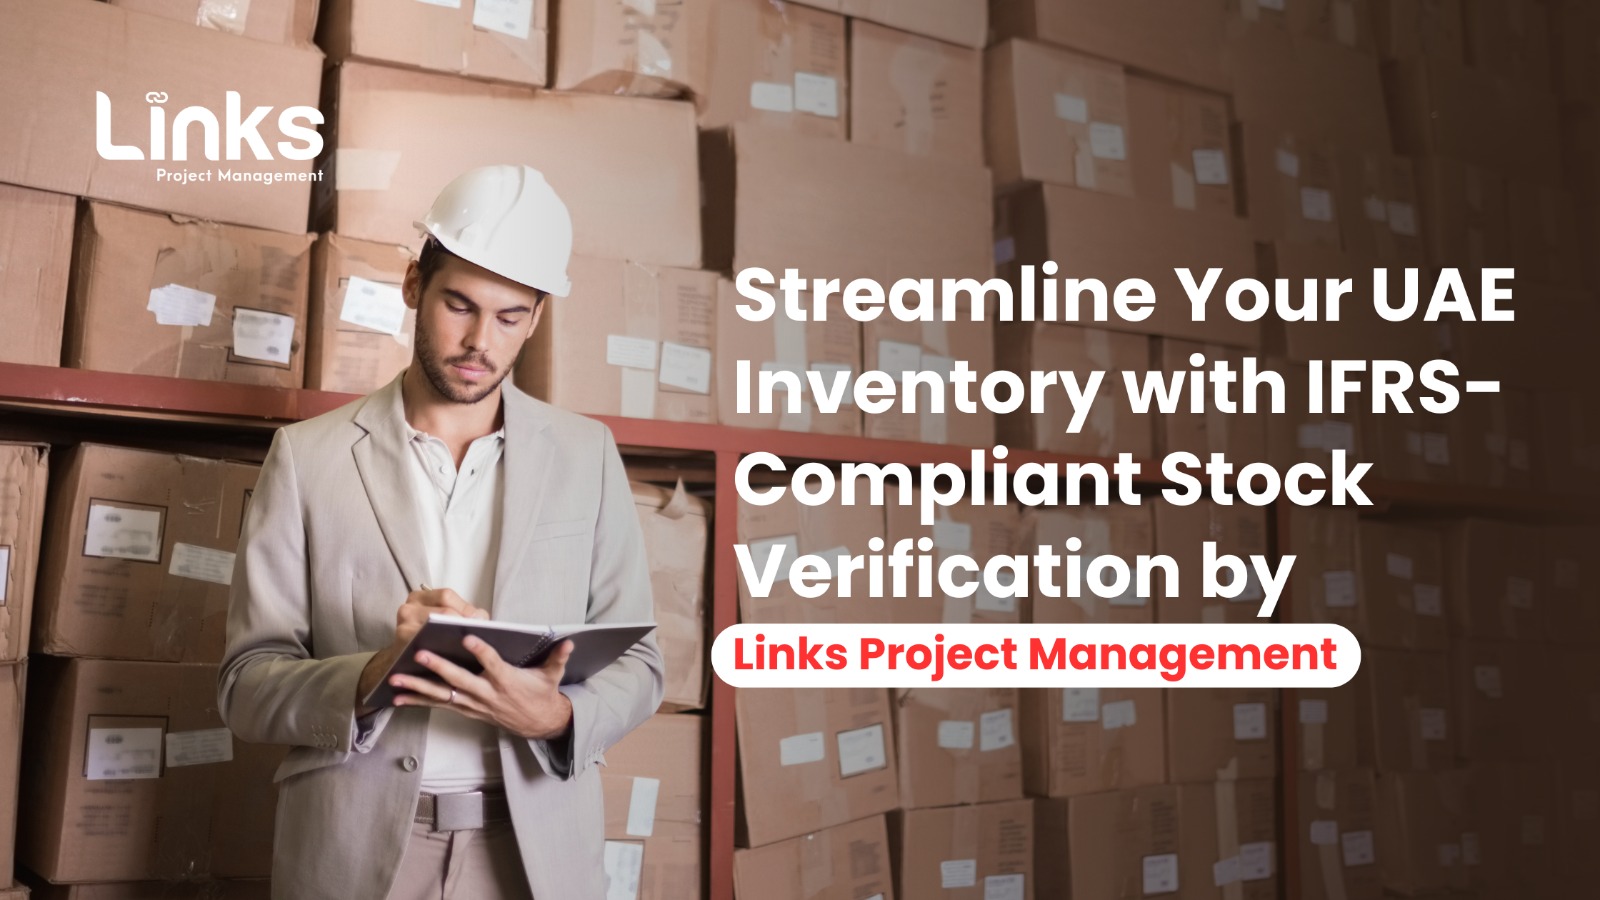 Streamline Your UAE Inventory with IFRS-Compliant Stock Verification by Links Project Management